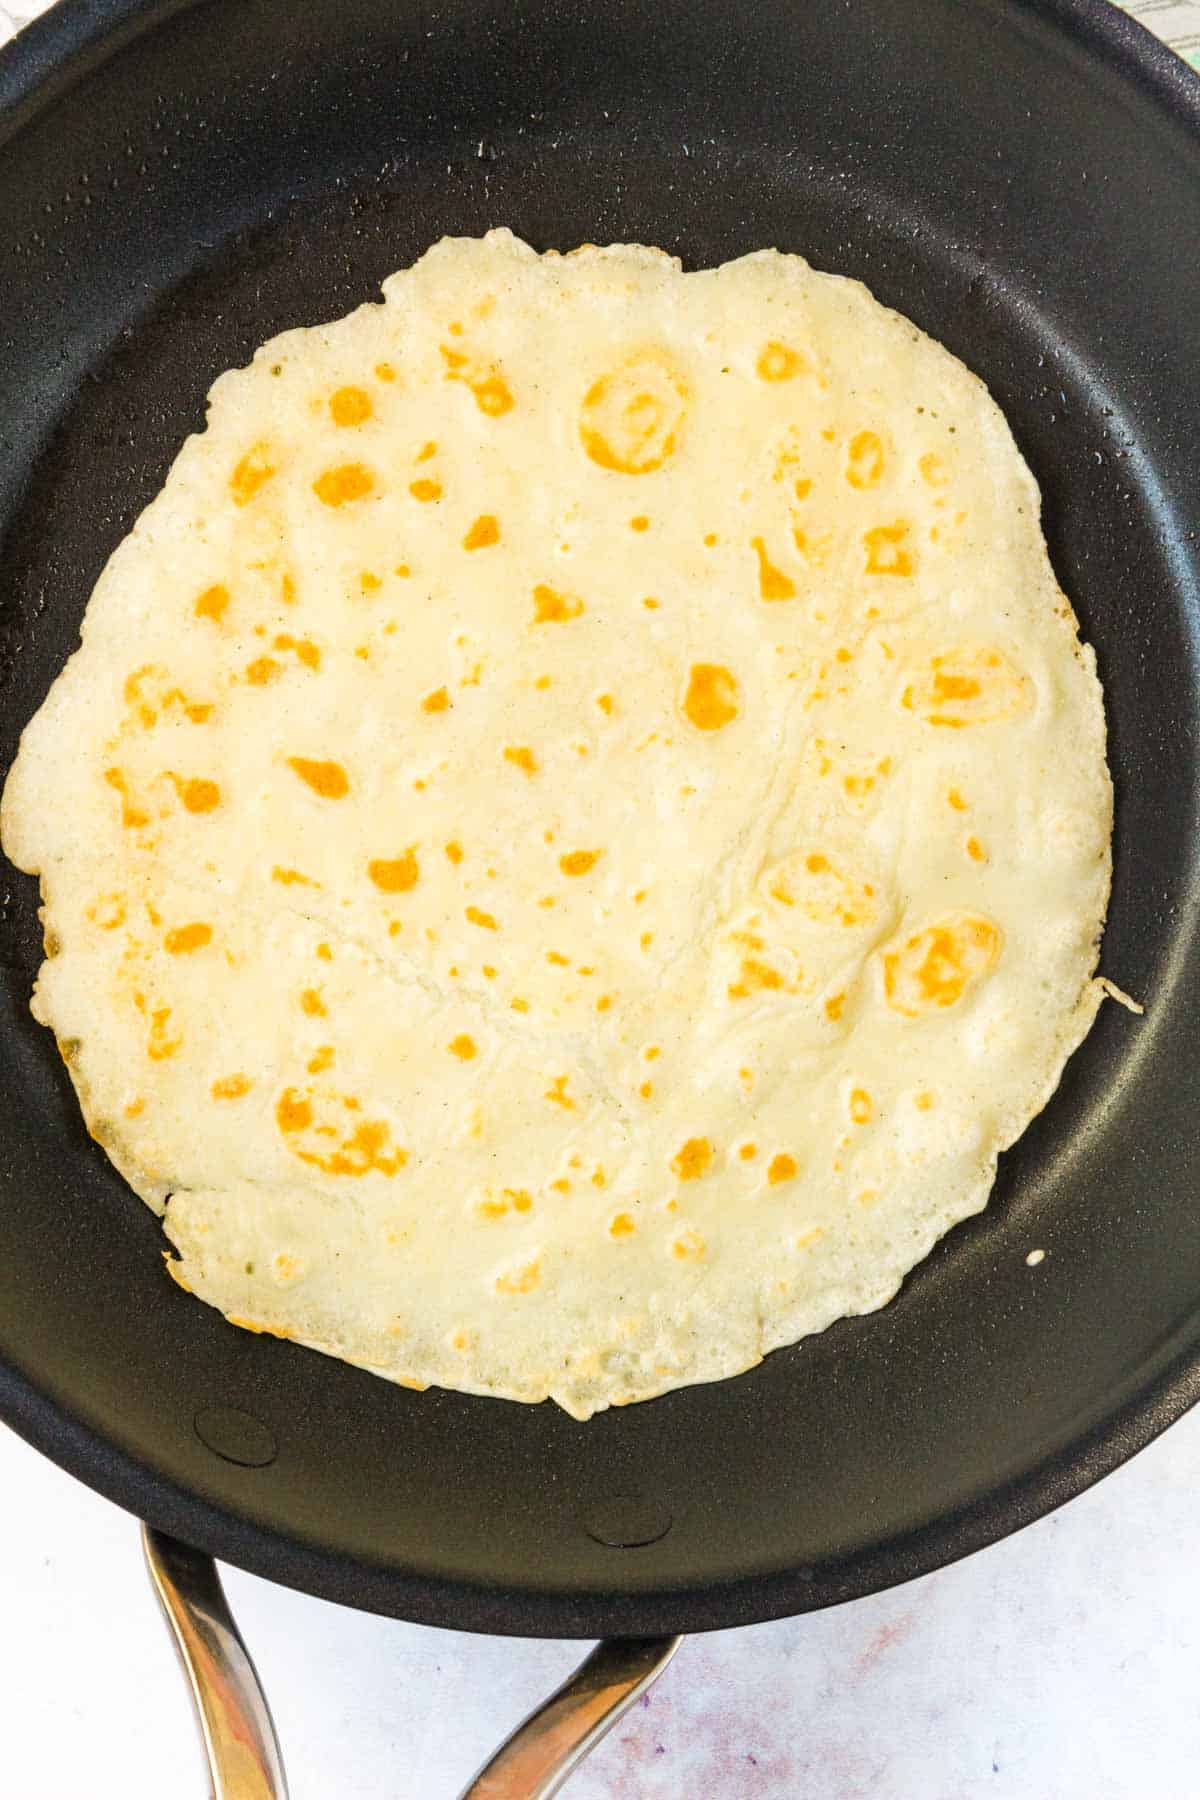 A crepe that's been flipped in a skillet to cook on the opposite side.